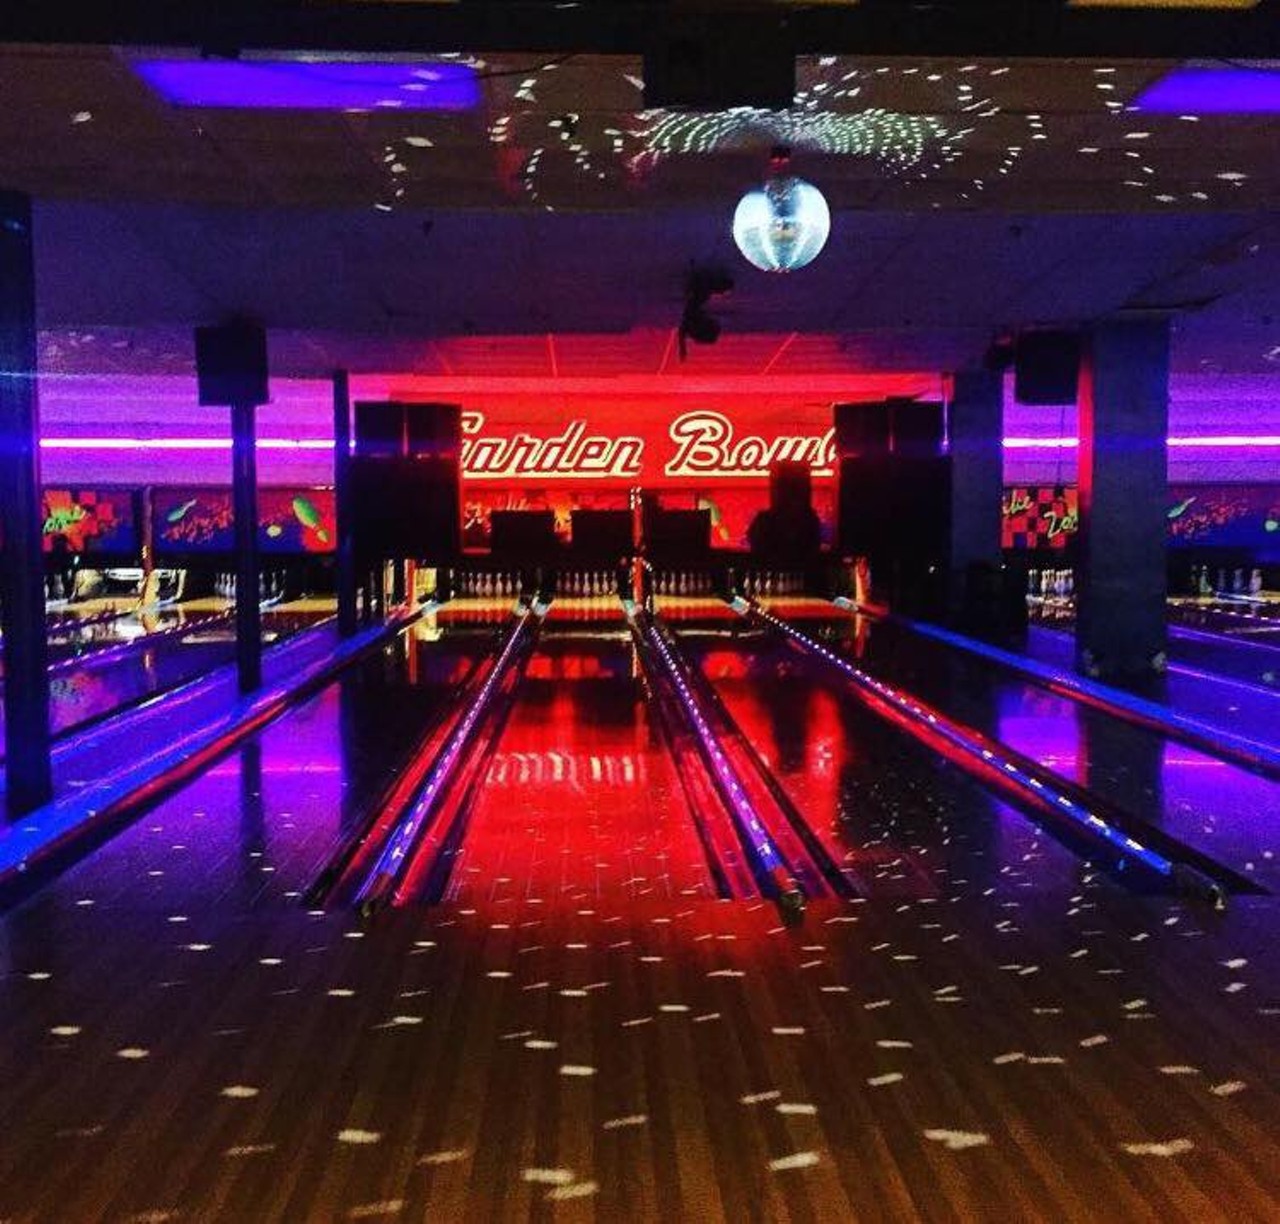 Bowl at Garden Bowl
The cool, funky lights will be a treat for your stoned state of mind. Also, there is pizza.&nbsp;Photo via IG user&nbsp;@winedeinedetroit.